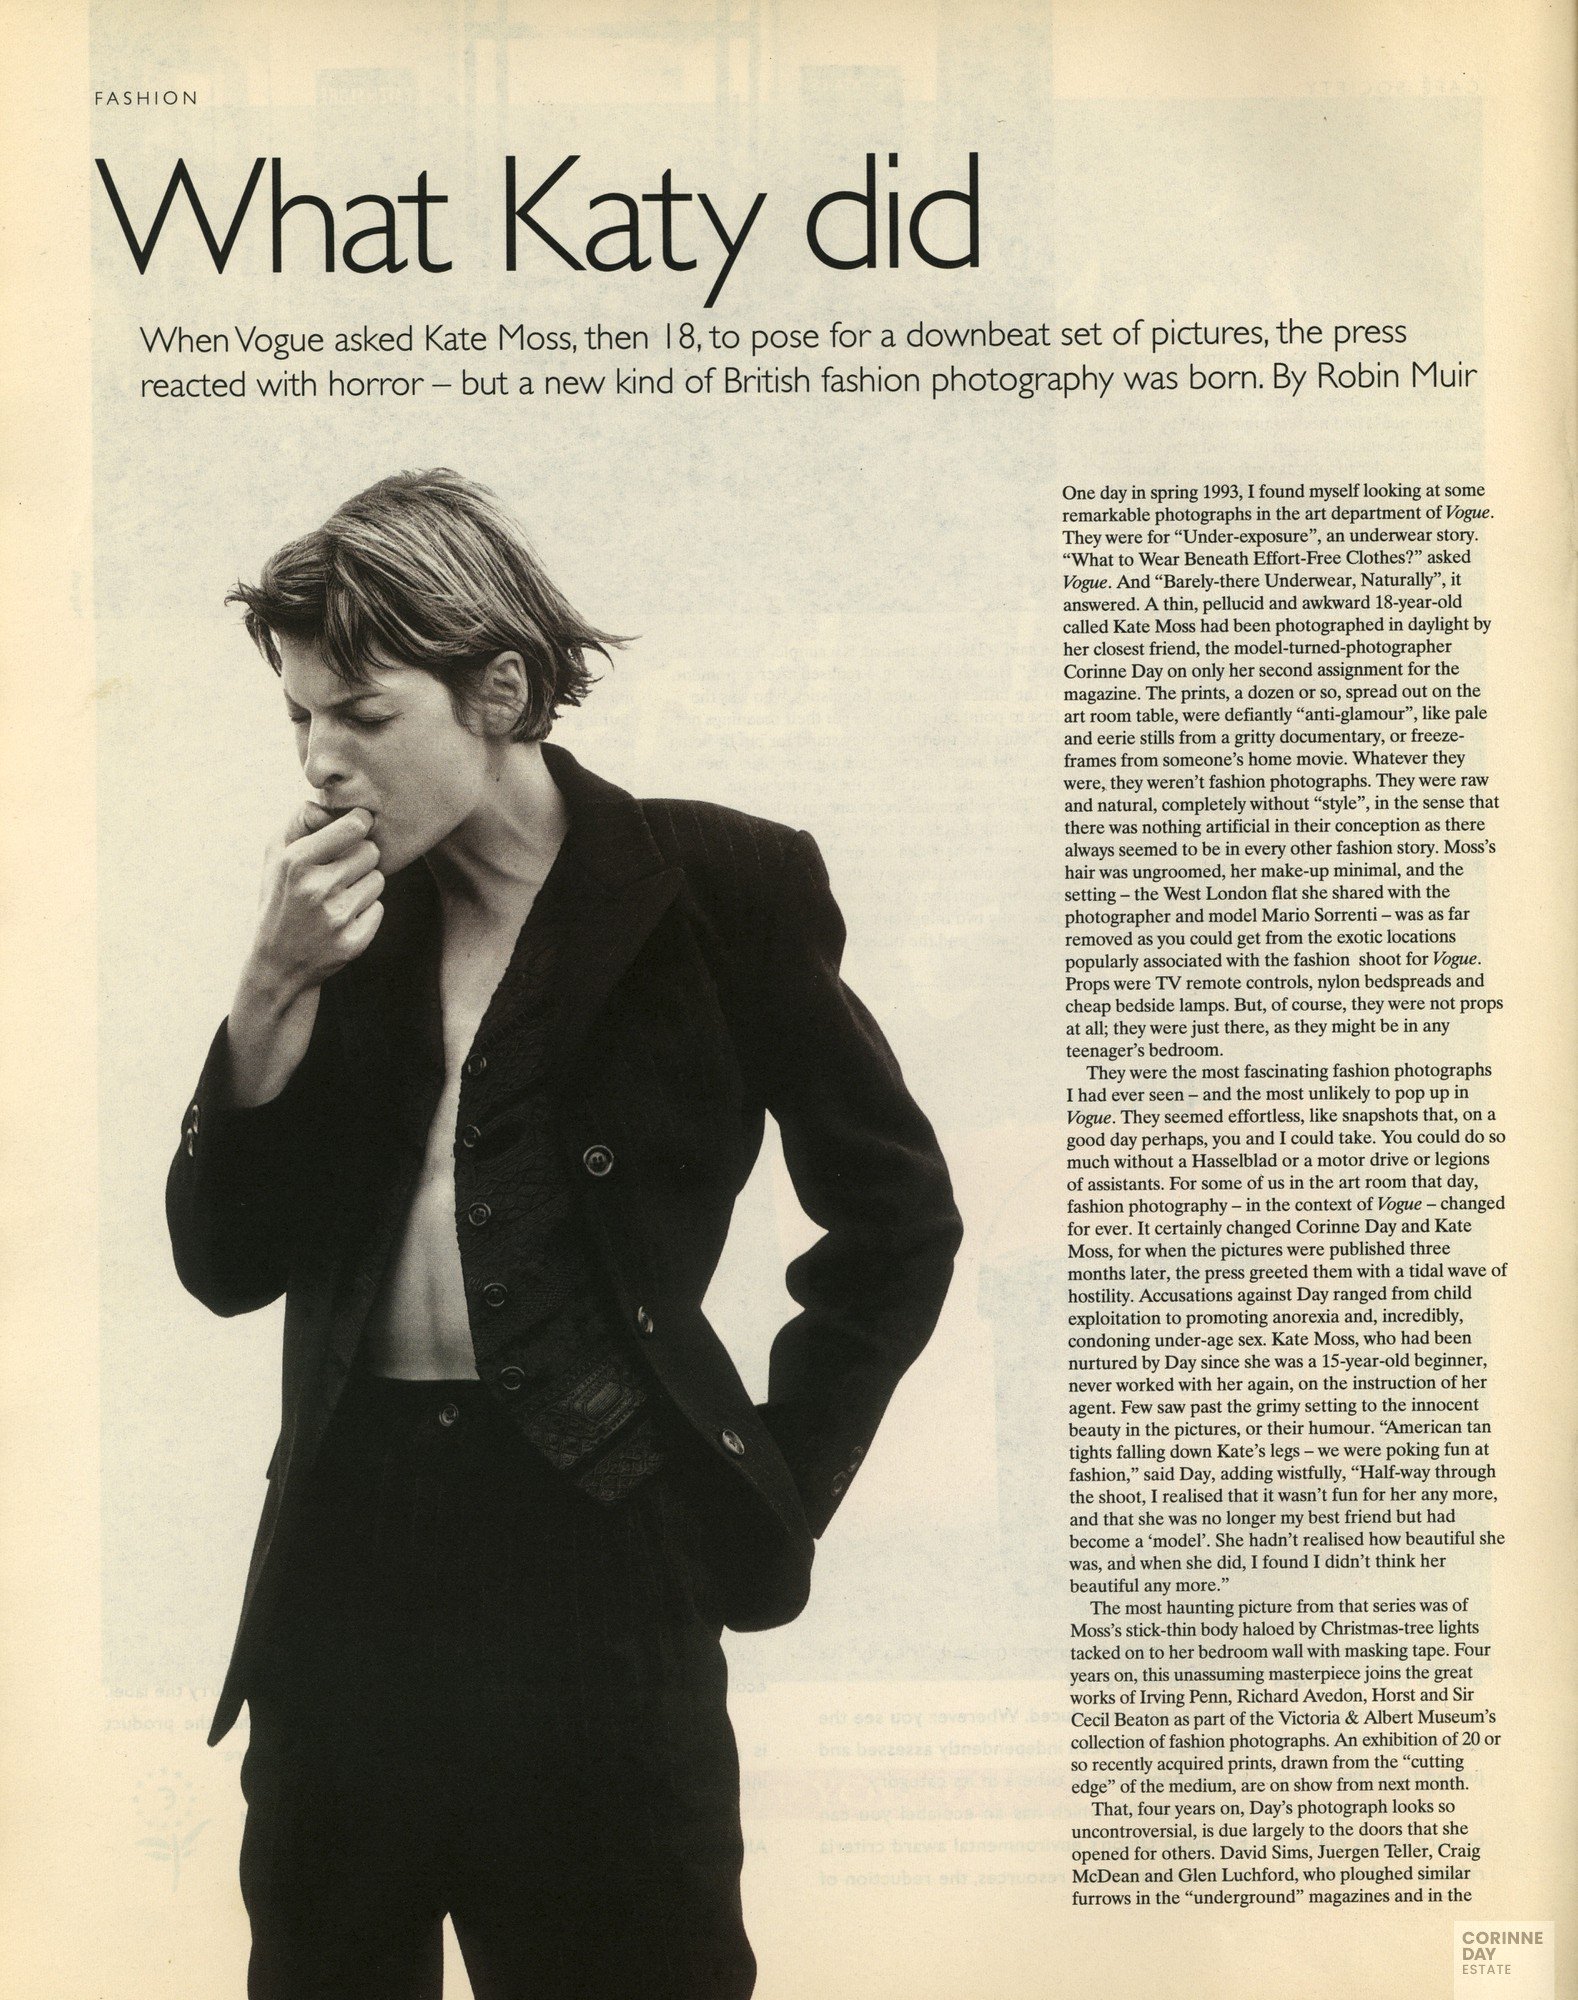 What Katy did, The Independent Magazine, 22 Feb 1997 — Image 1 of 3